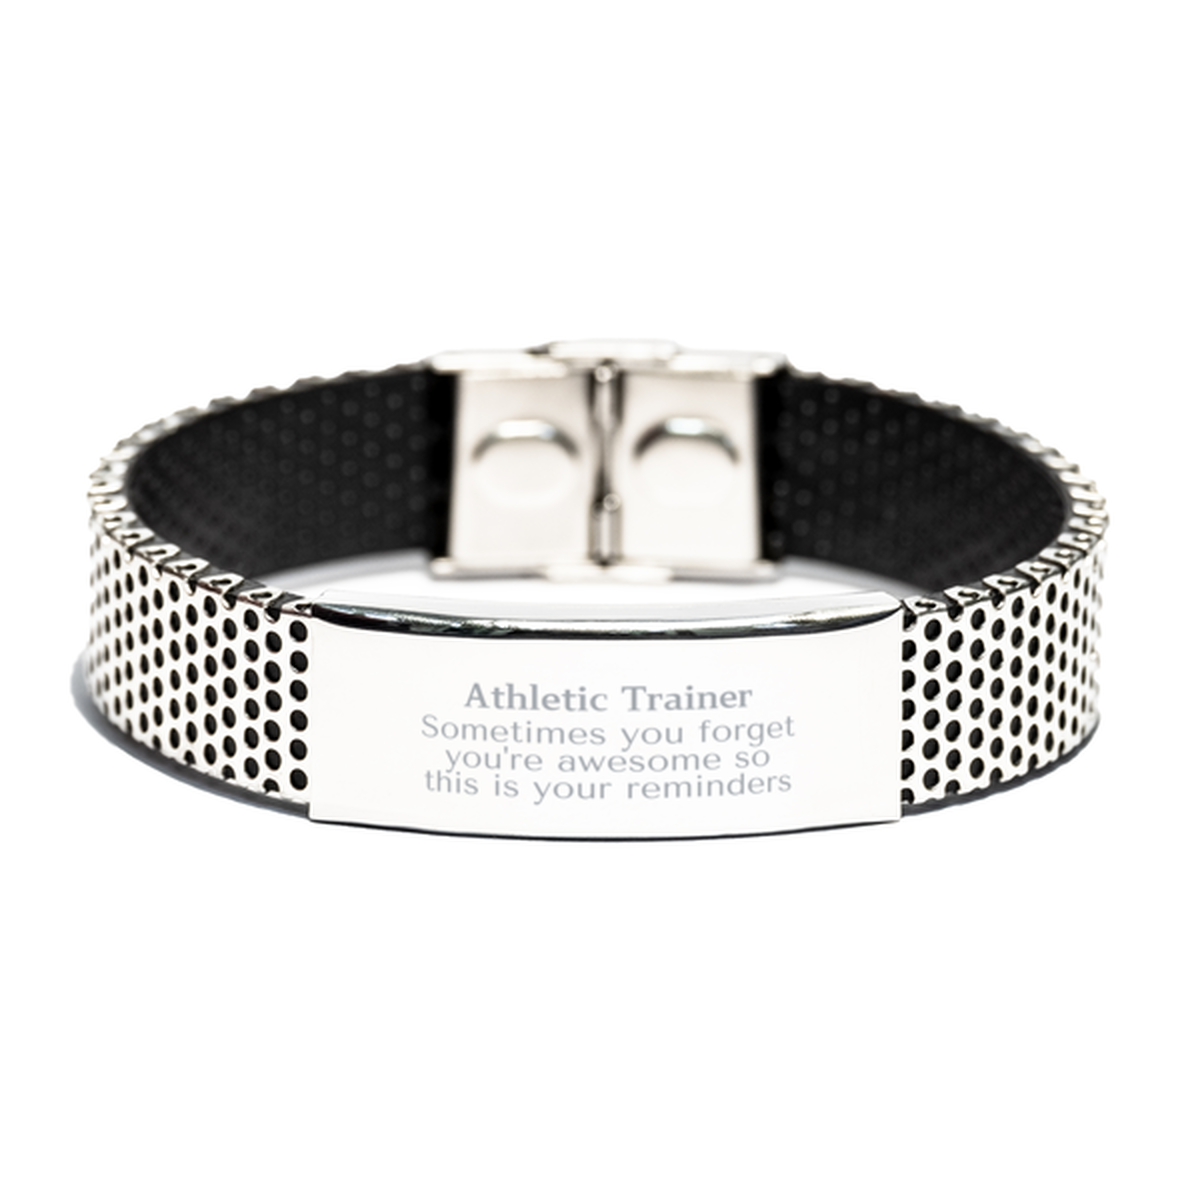 Sentimental Athletic Trainer Stainless Steel Bracelet, Athletic Trainer Sometimes you forget you're awesome so this is your reminders, Graduation Christmas Birthday Gifts for Athletic Trainer, Men, Women, Coworkers